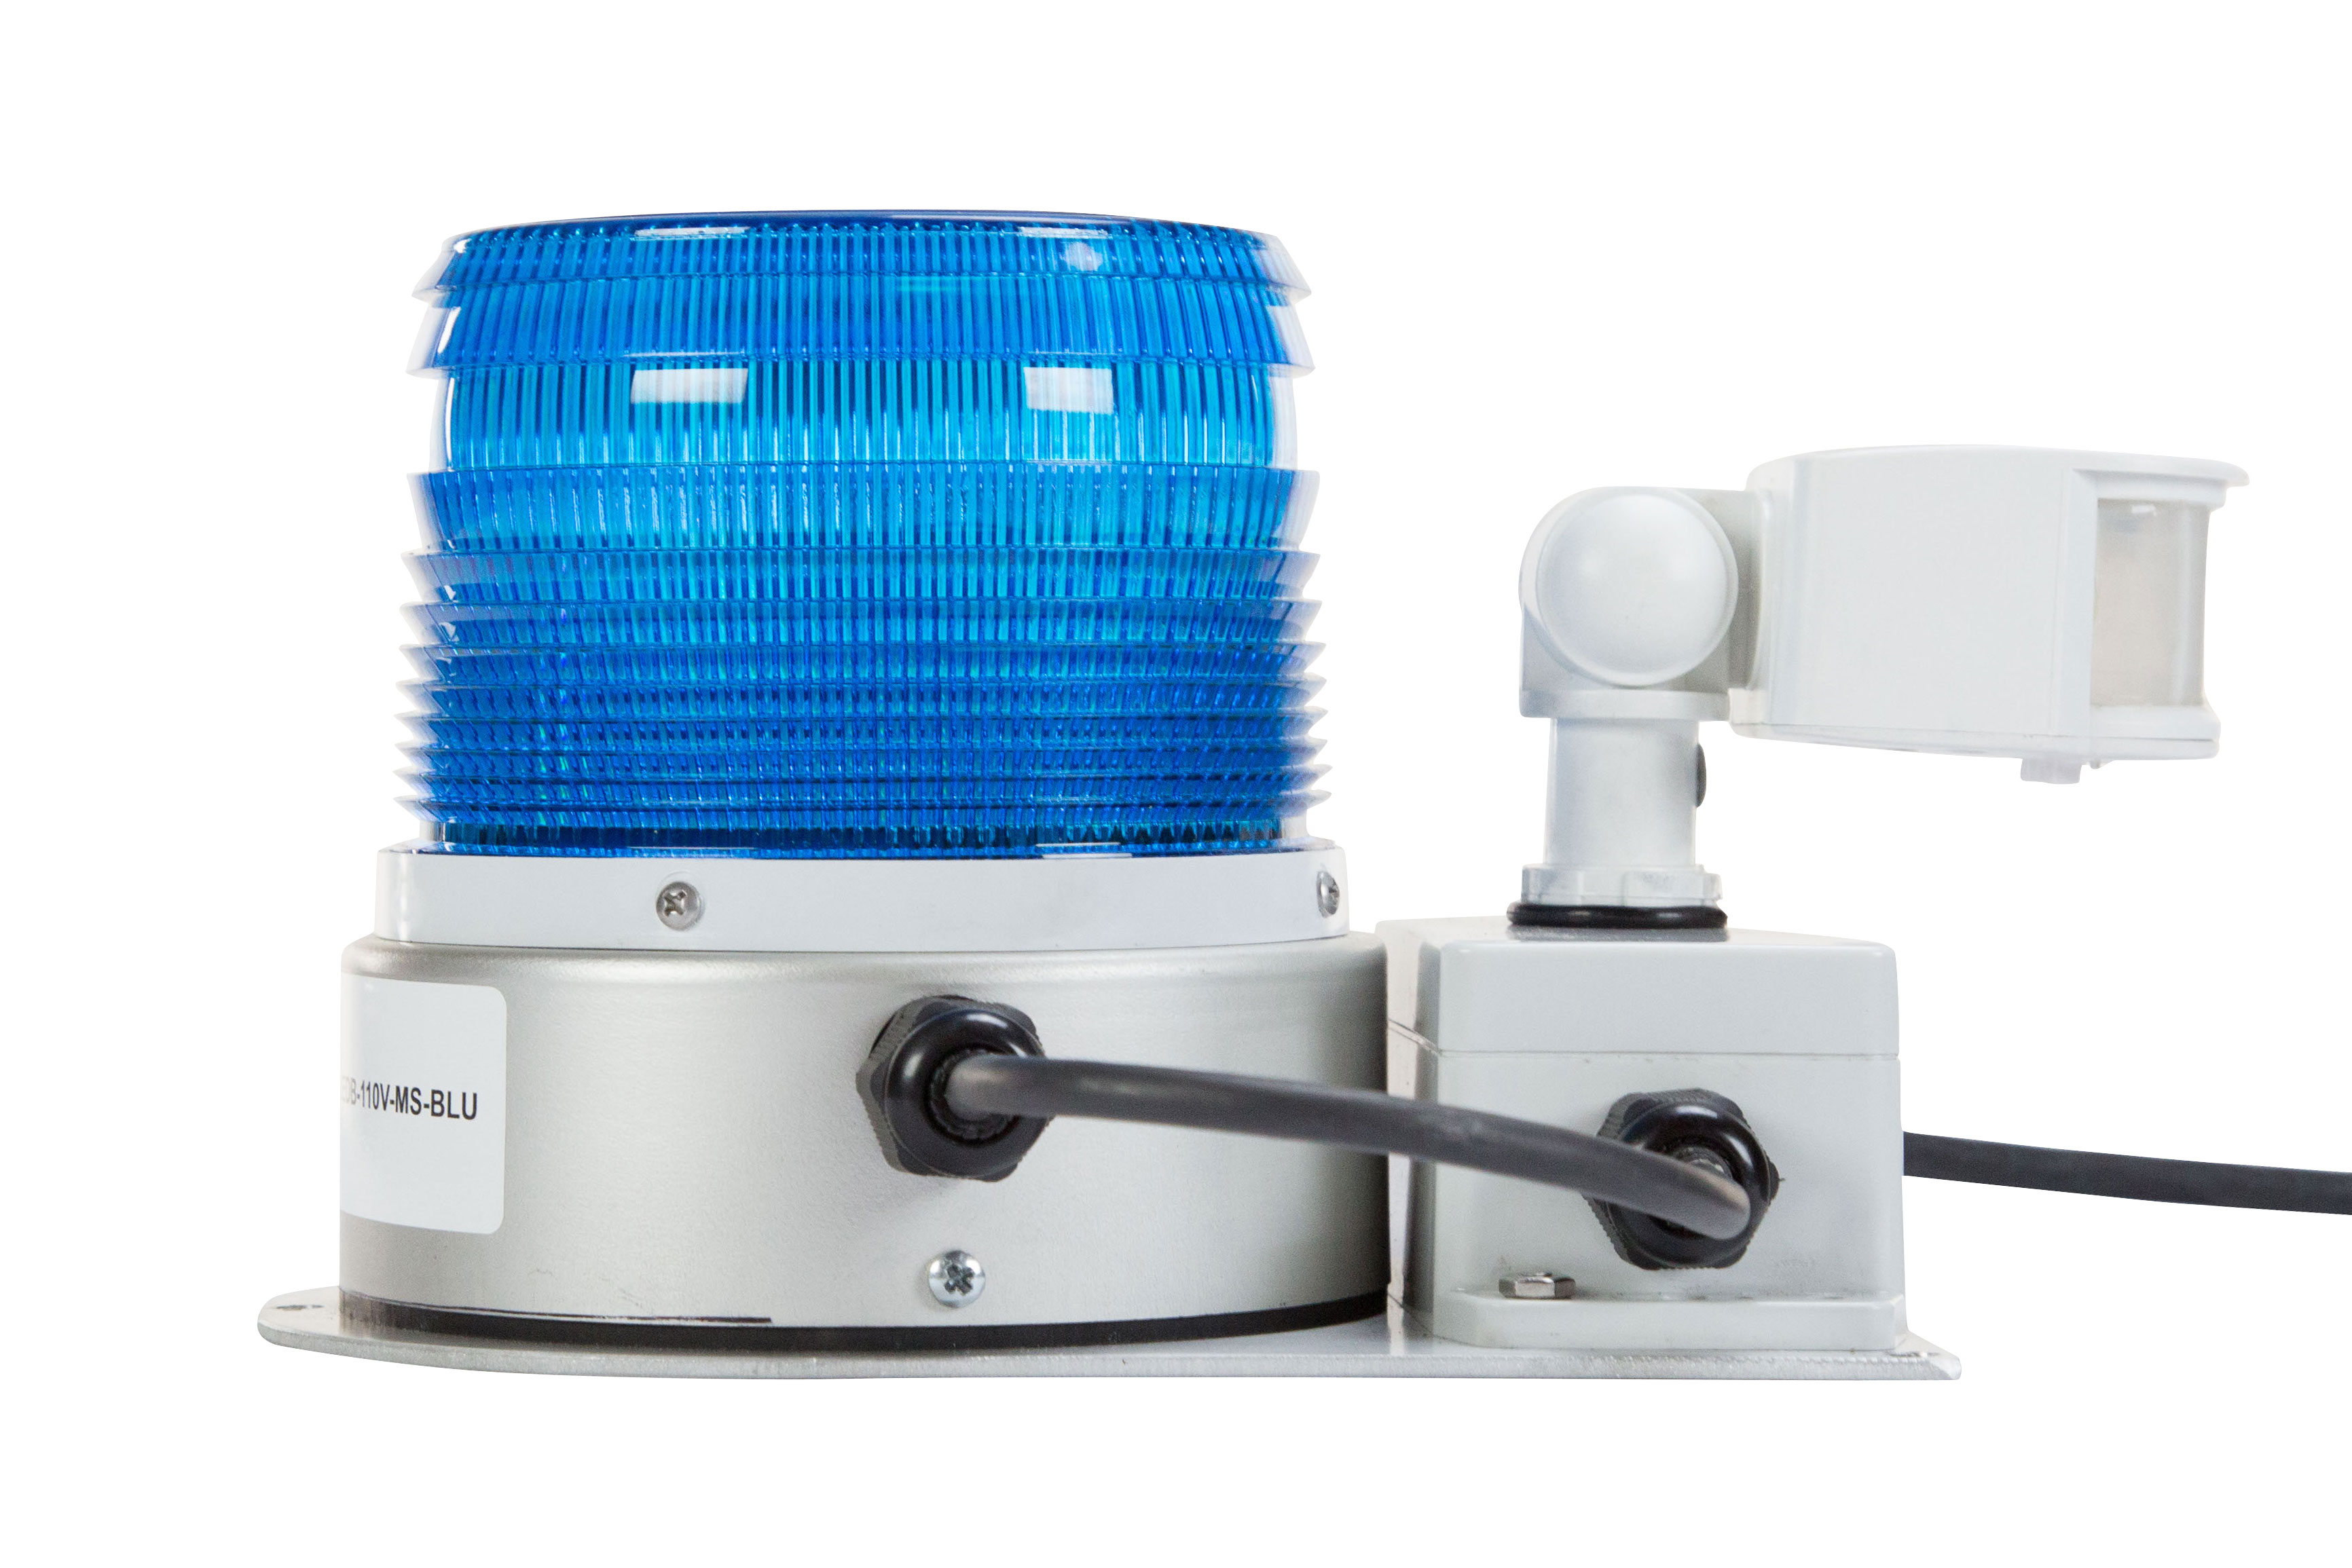 Larson Electronics Releases a LED Strobe Light Equipped with a Motion Sensor